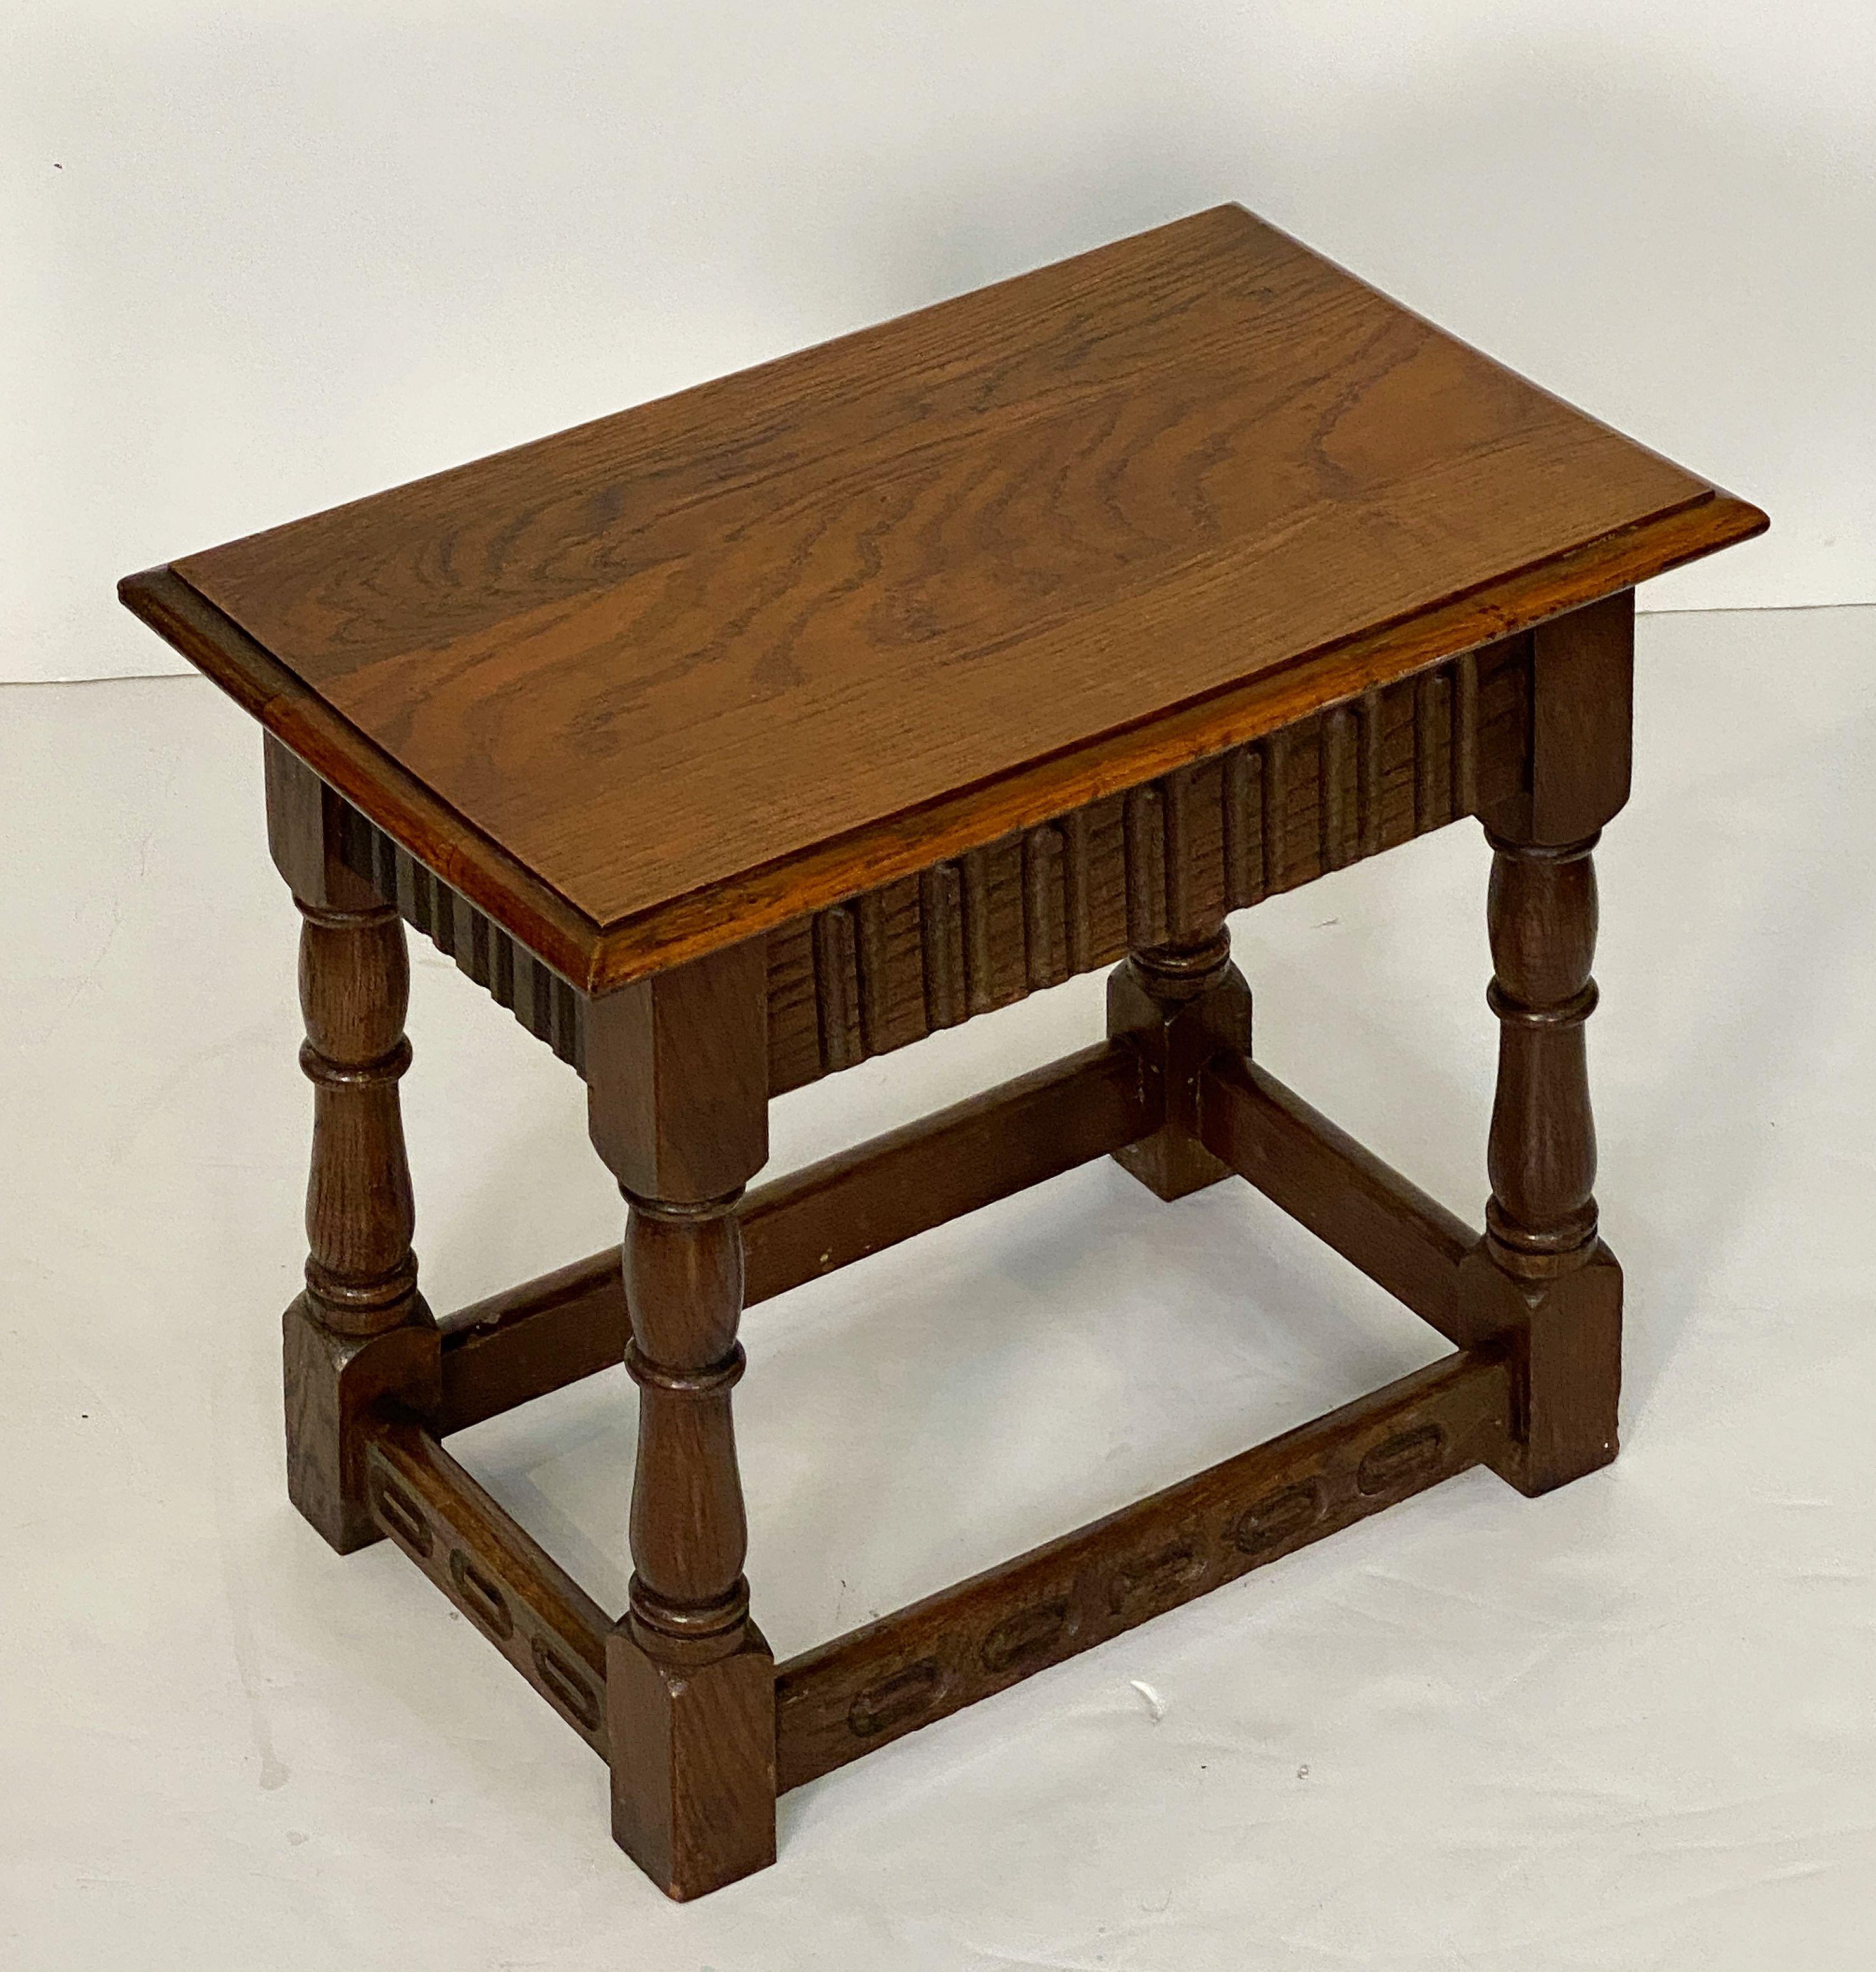 A fine English joint stool or seating bench of well patinated oak, featuring a rectangular top with moulded edge, set upon a stretcher base with a carved design on the frieze and four turned legs.